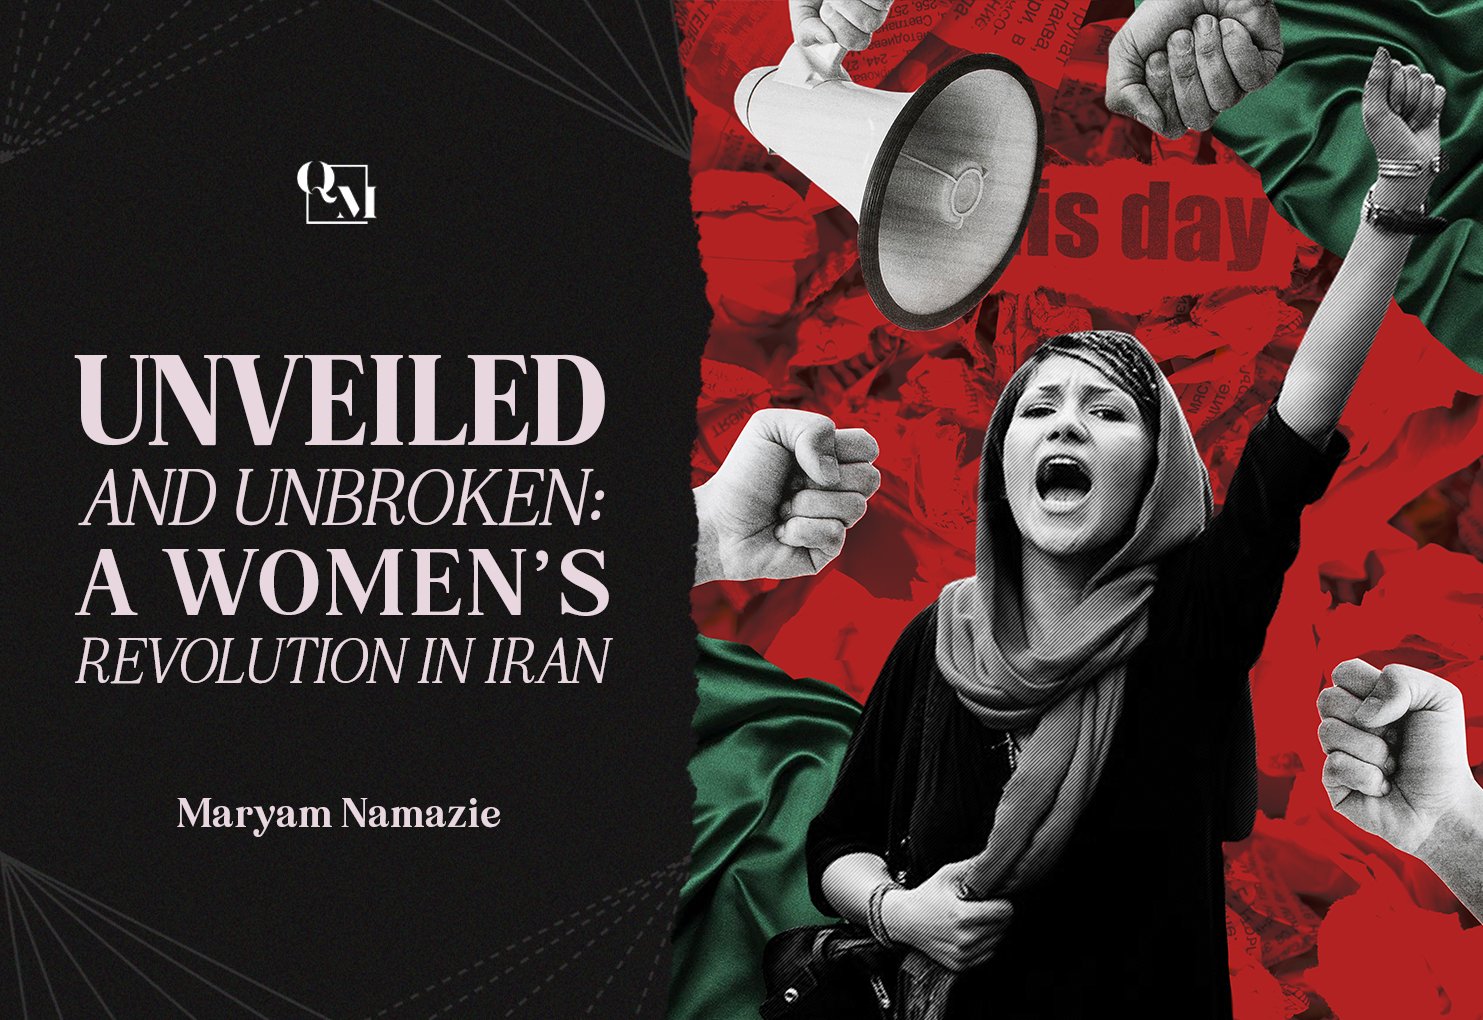 Unveiled and Unbroken: Woman’s Revolution in Iran